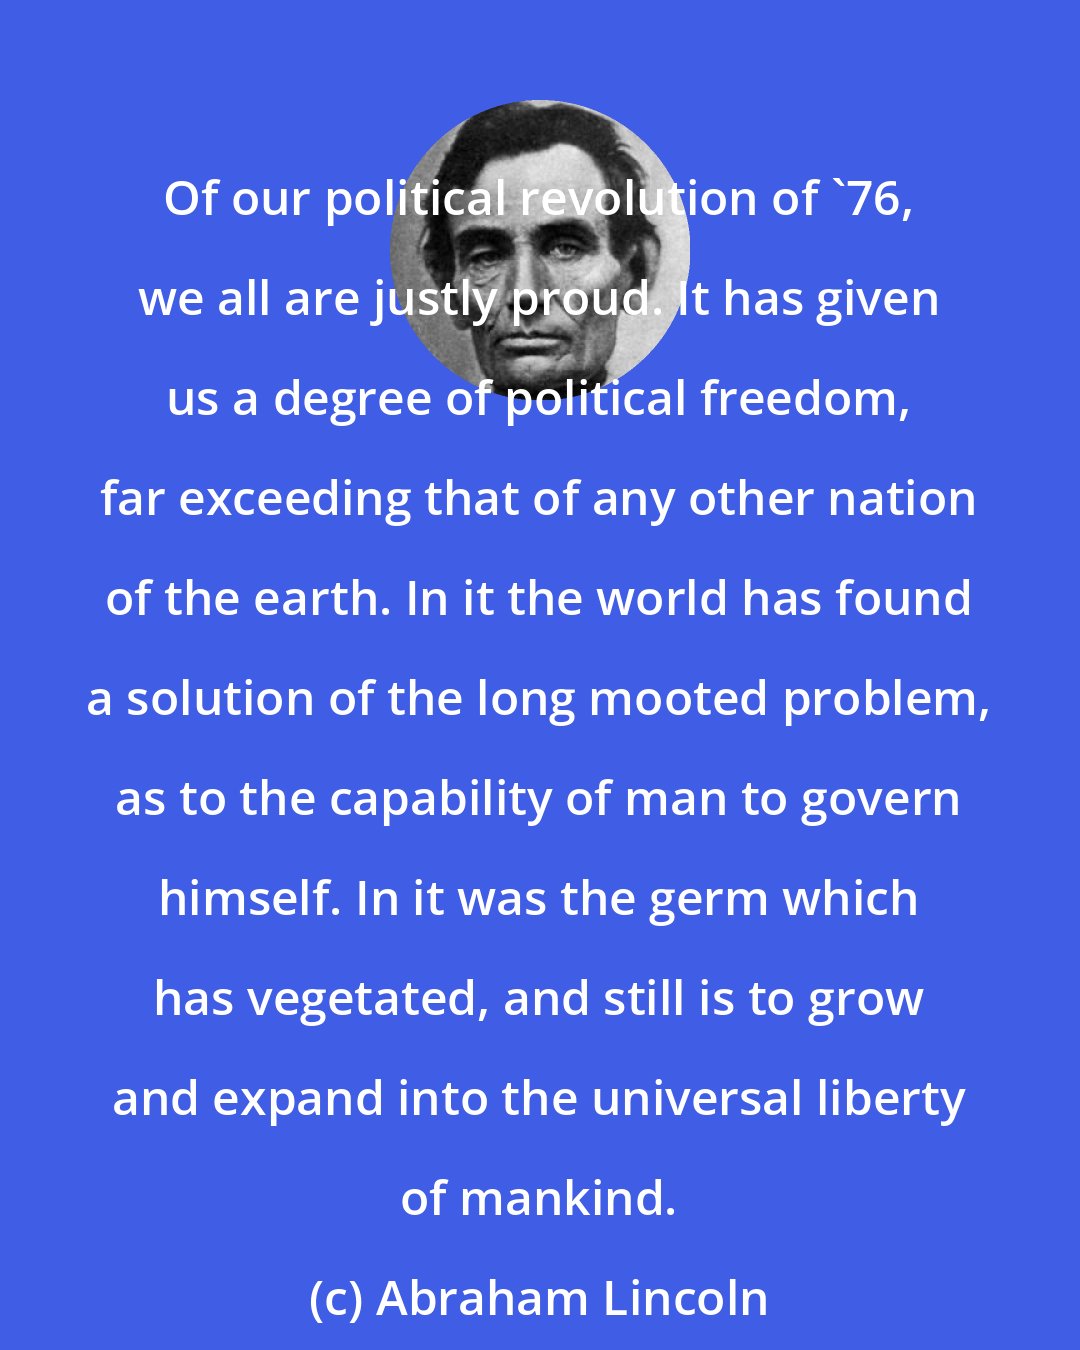 Abraham Lincoln: Of our political revolution of '76, we all are justly proud. It has given us a degree of political freedom, far exceeding that of any other nation of the earth. In it the world has found a solution of the long mooted problem, as to the capability of man to govern himself. In it was the germ which has vegetated, and still is to grow and expand into the universal liberty of mankind.